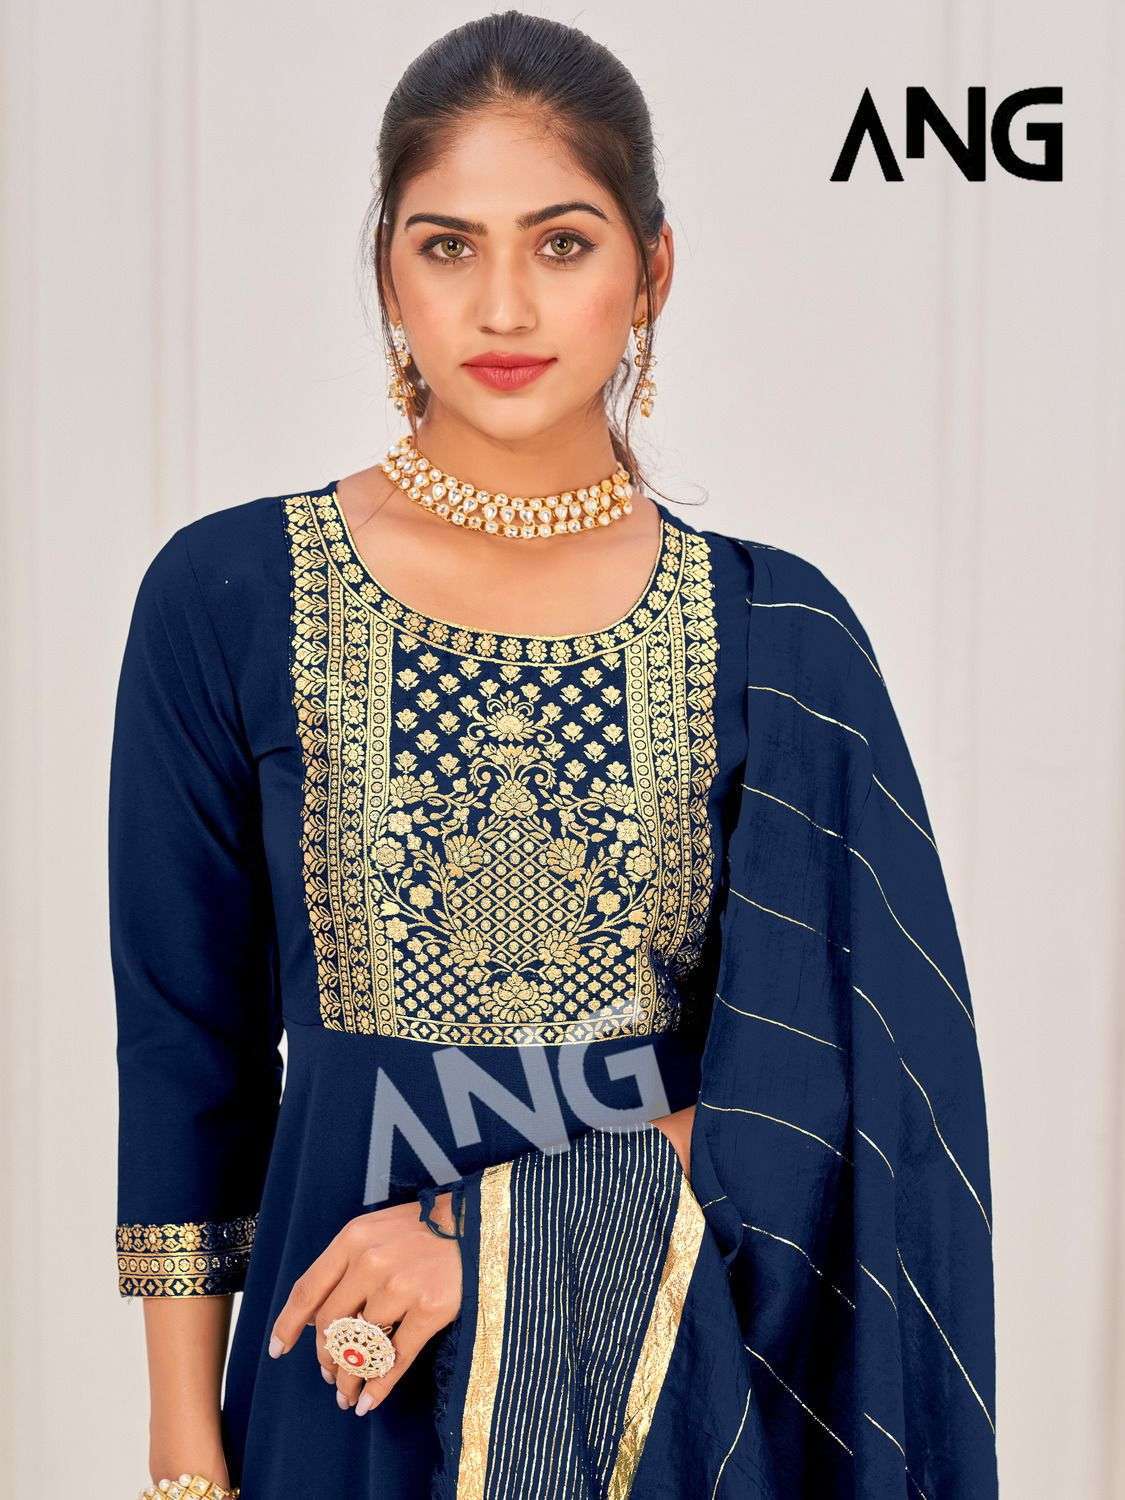 ang 1120 Malai crape with jecard neck readymade suit 